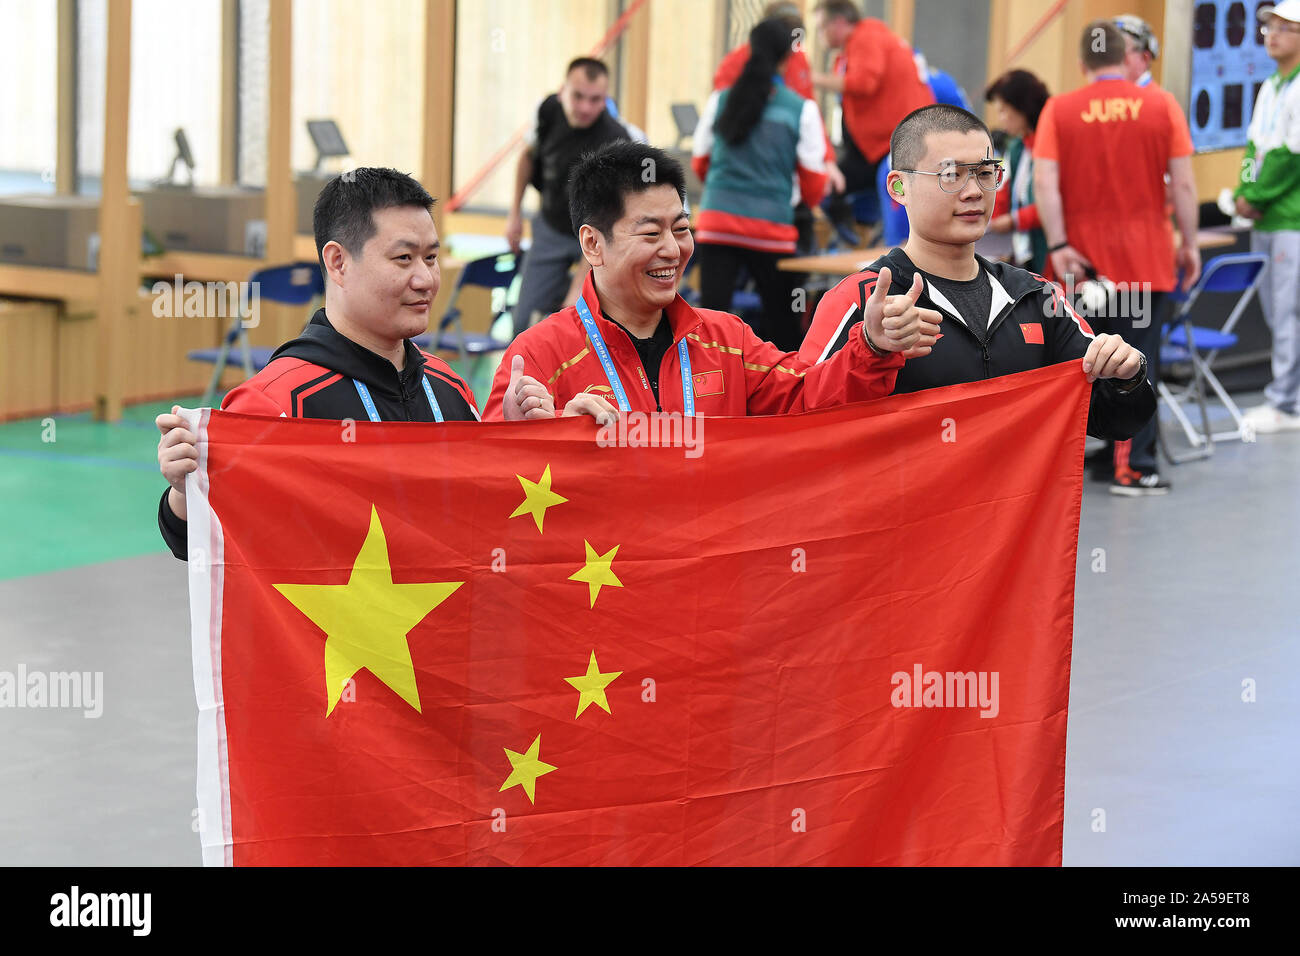 Wuhan, China's Hubei Province. 19th Oct, 2019. Jin Yongde (C), Xie Zhenxiang (L) and Yao Zhaonan of China celebrate after winning the team competition of the Men's 25m Military Rapid Fire Pistol of the 7th CISM Military World Games in Wuhan, capital of central China's Hubei Province, Oct. 19, 2019. Credit: Wan Xiang/Xinhua/Alamy Live News Stock Photo